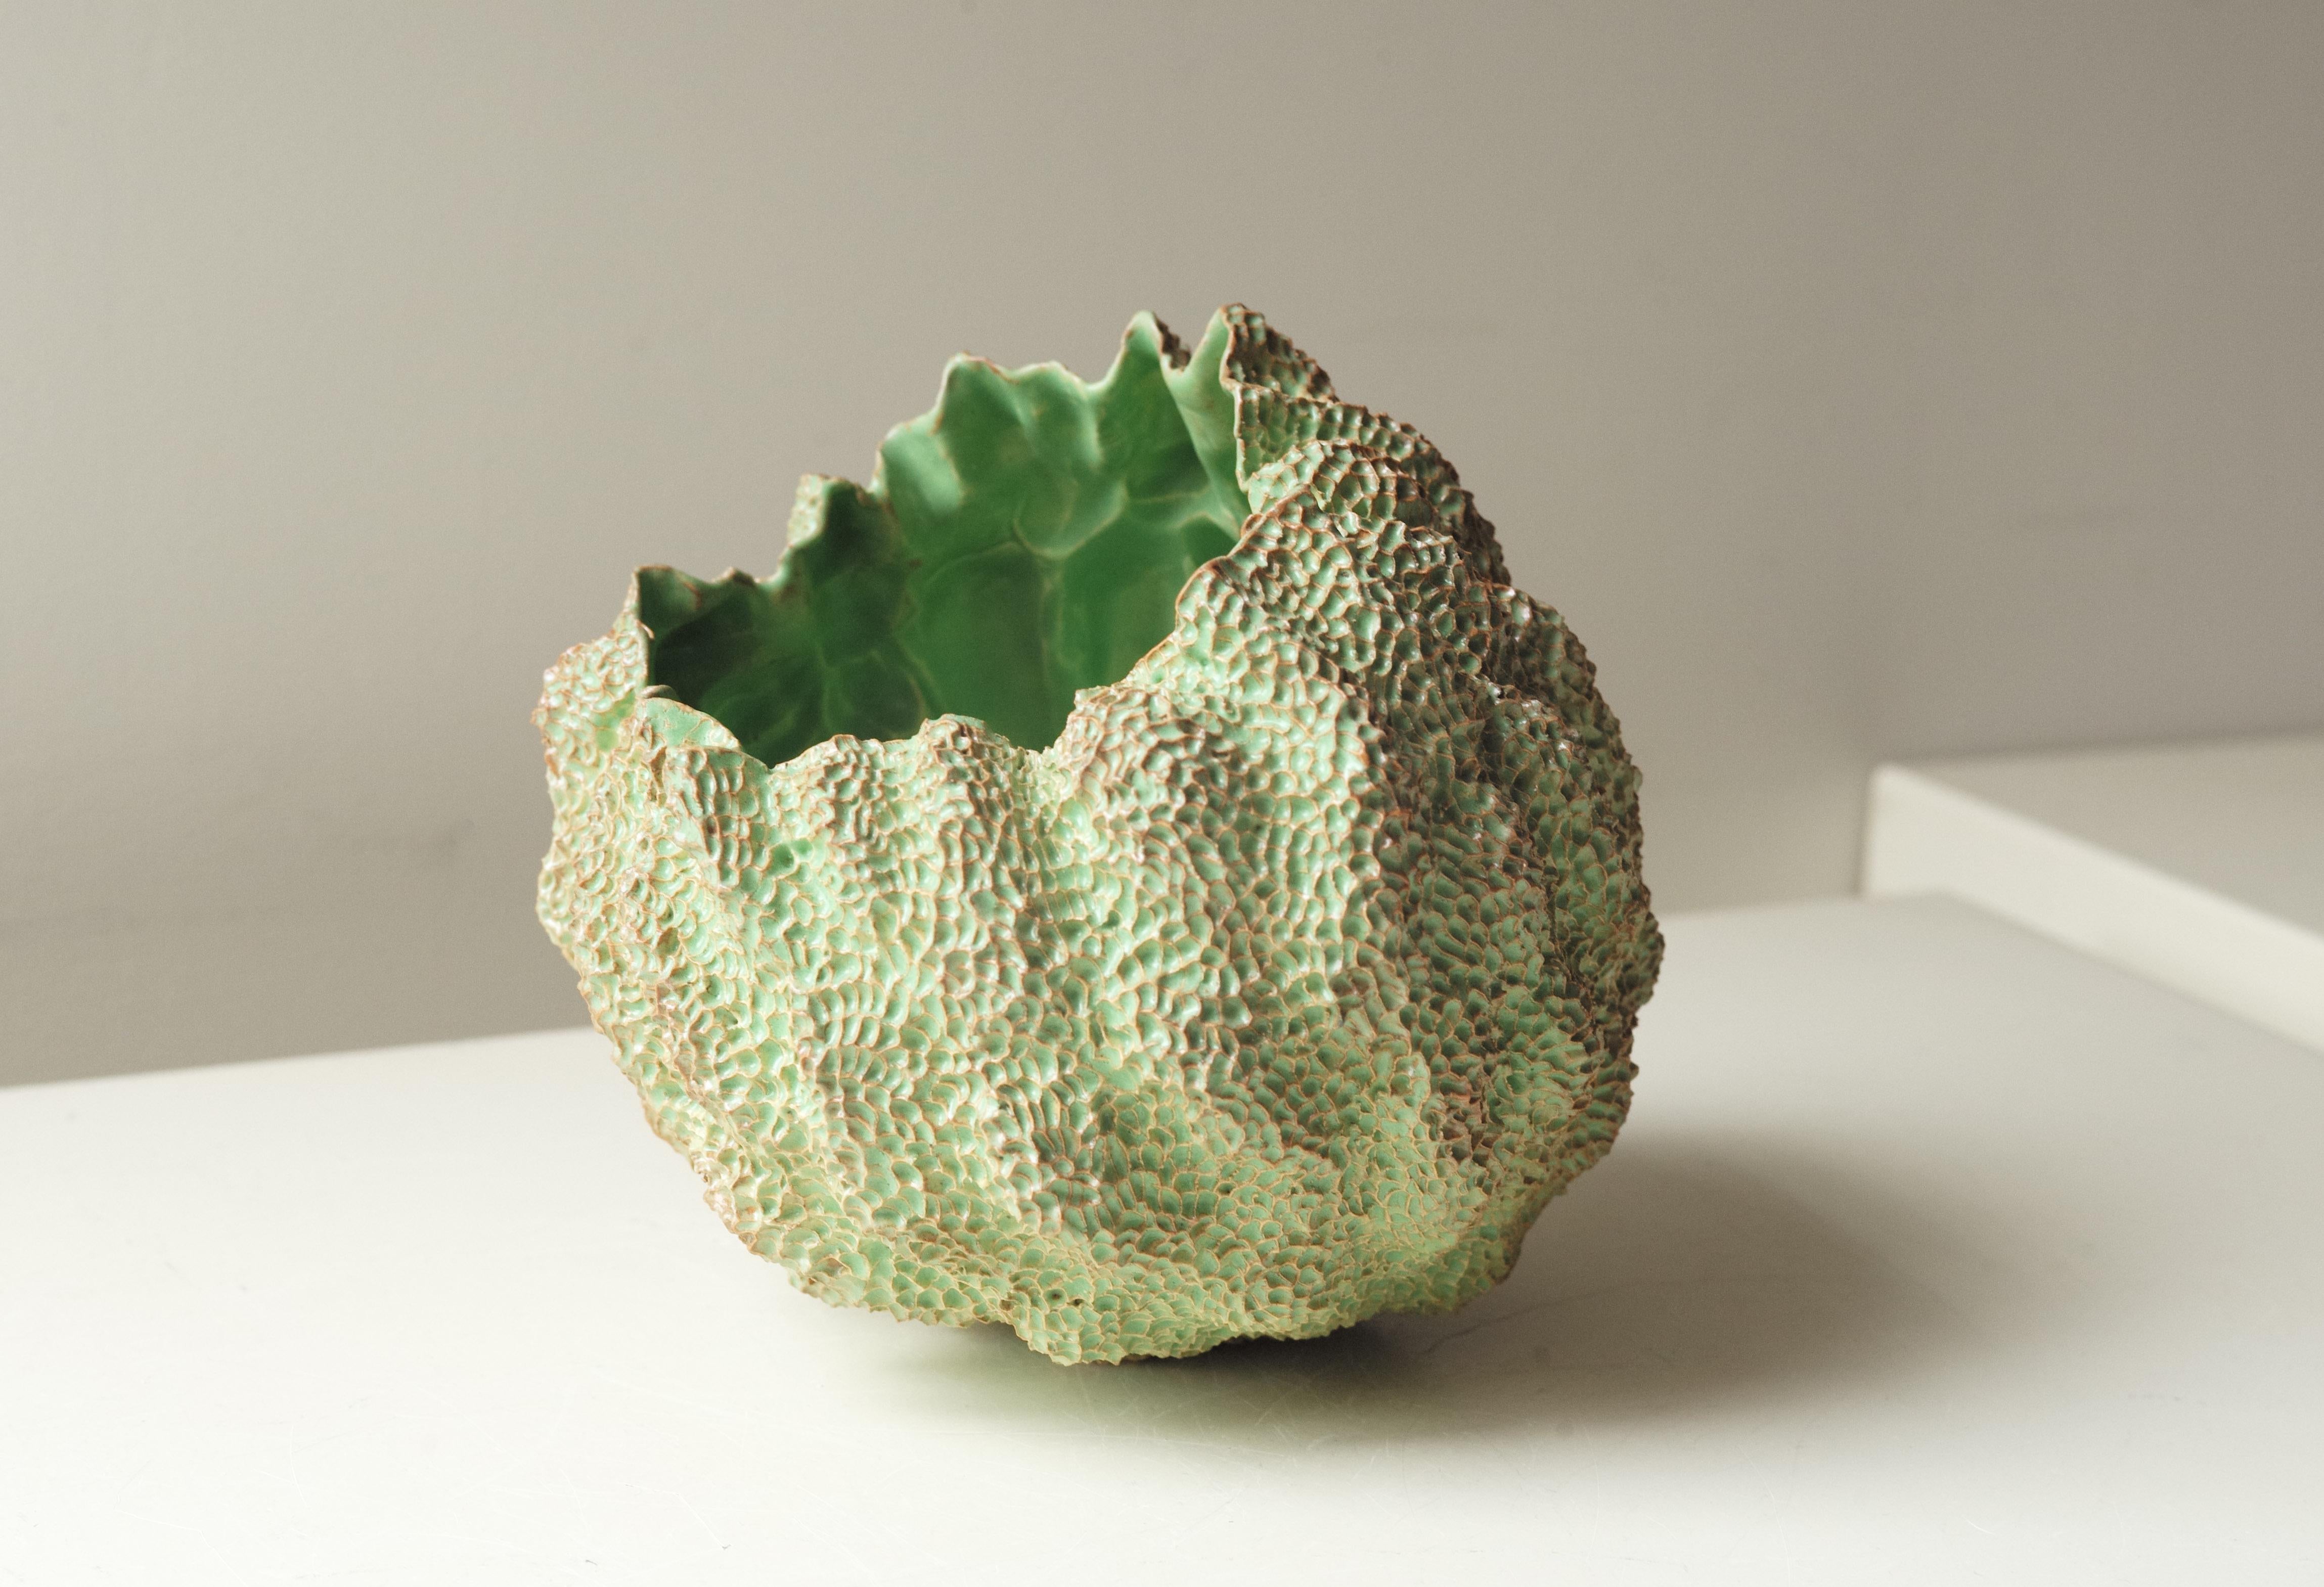 Hand-sculpted and meticulously carved ceramic sculpture. Glazed in lime green glaze that breaks into light brown on the edges. Created in 2016 by Lana Kova. Unique work.